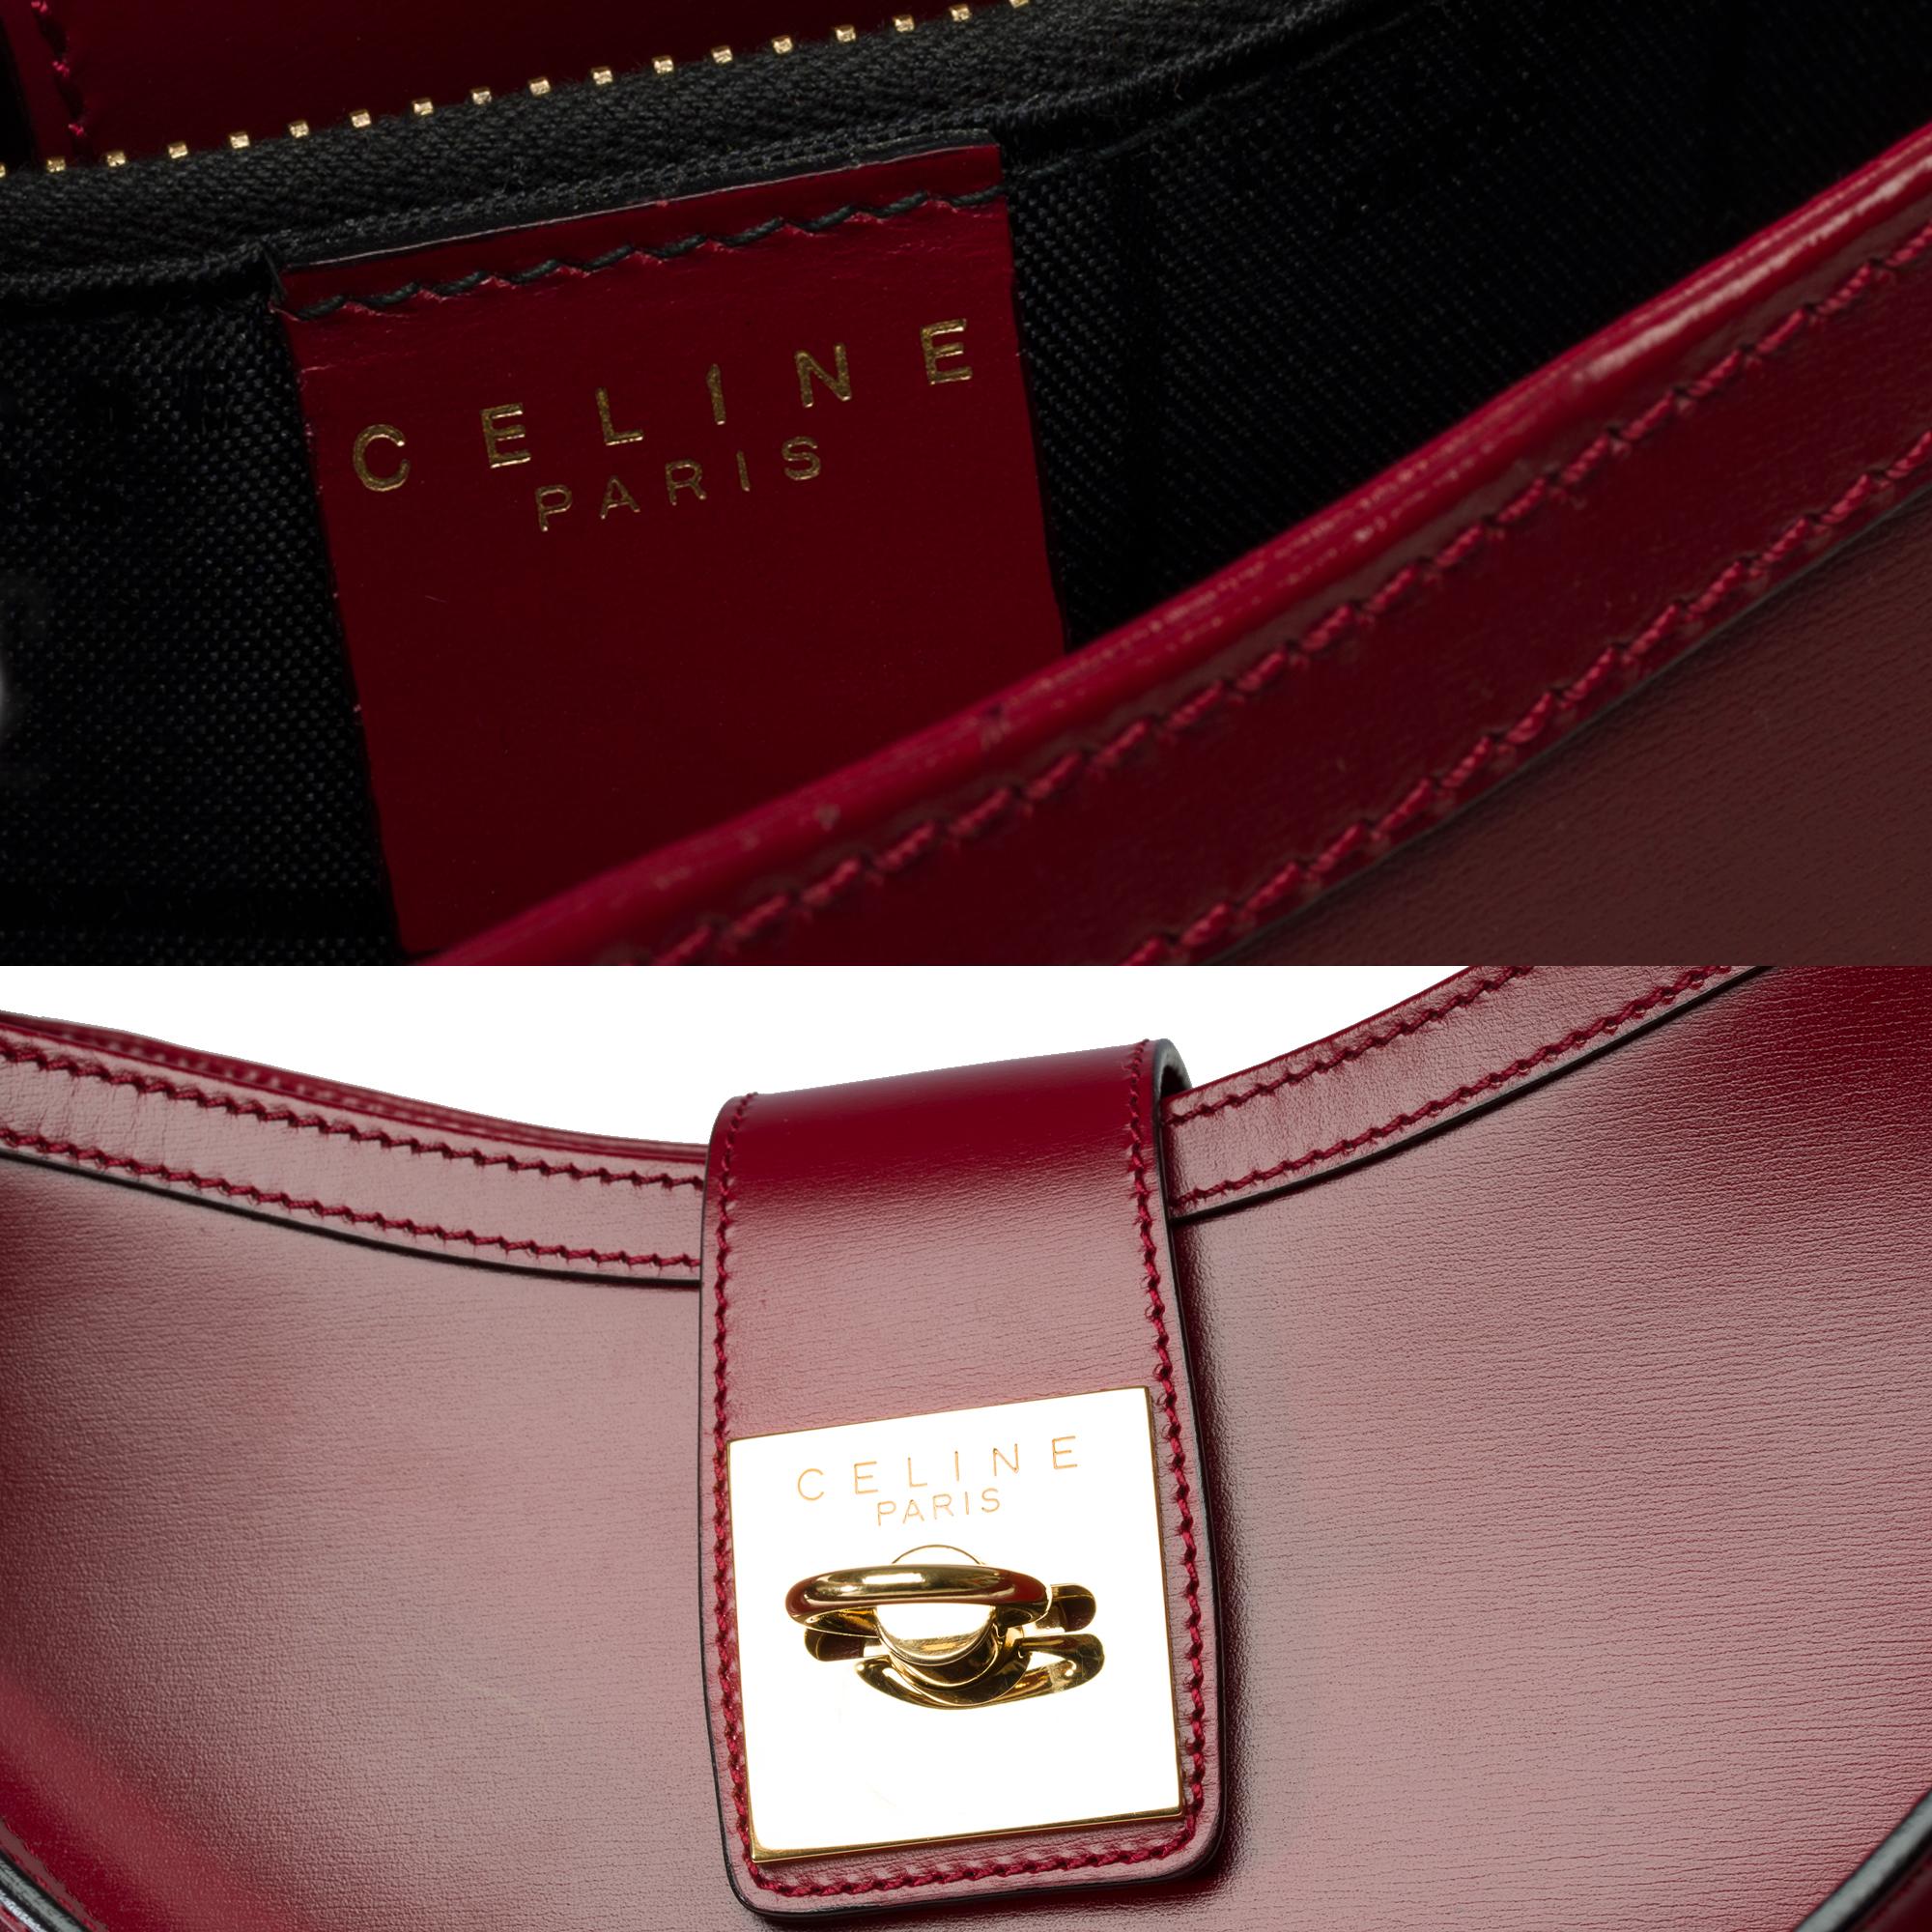 Gorgeous Celine vintage Tote bag in red cherry box calf, GHW 2